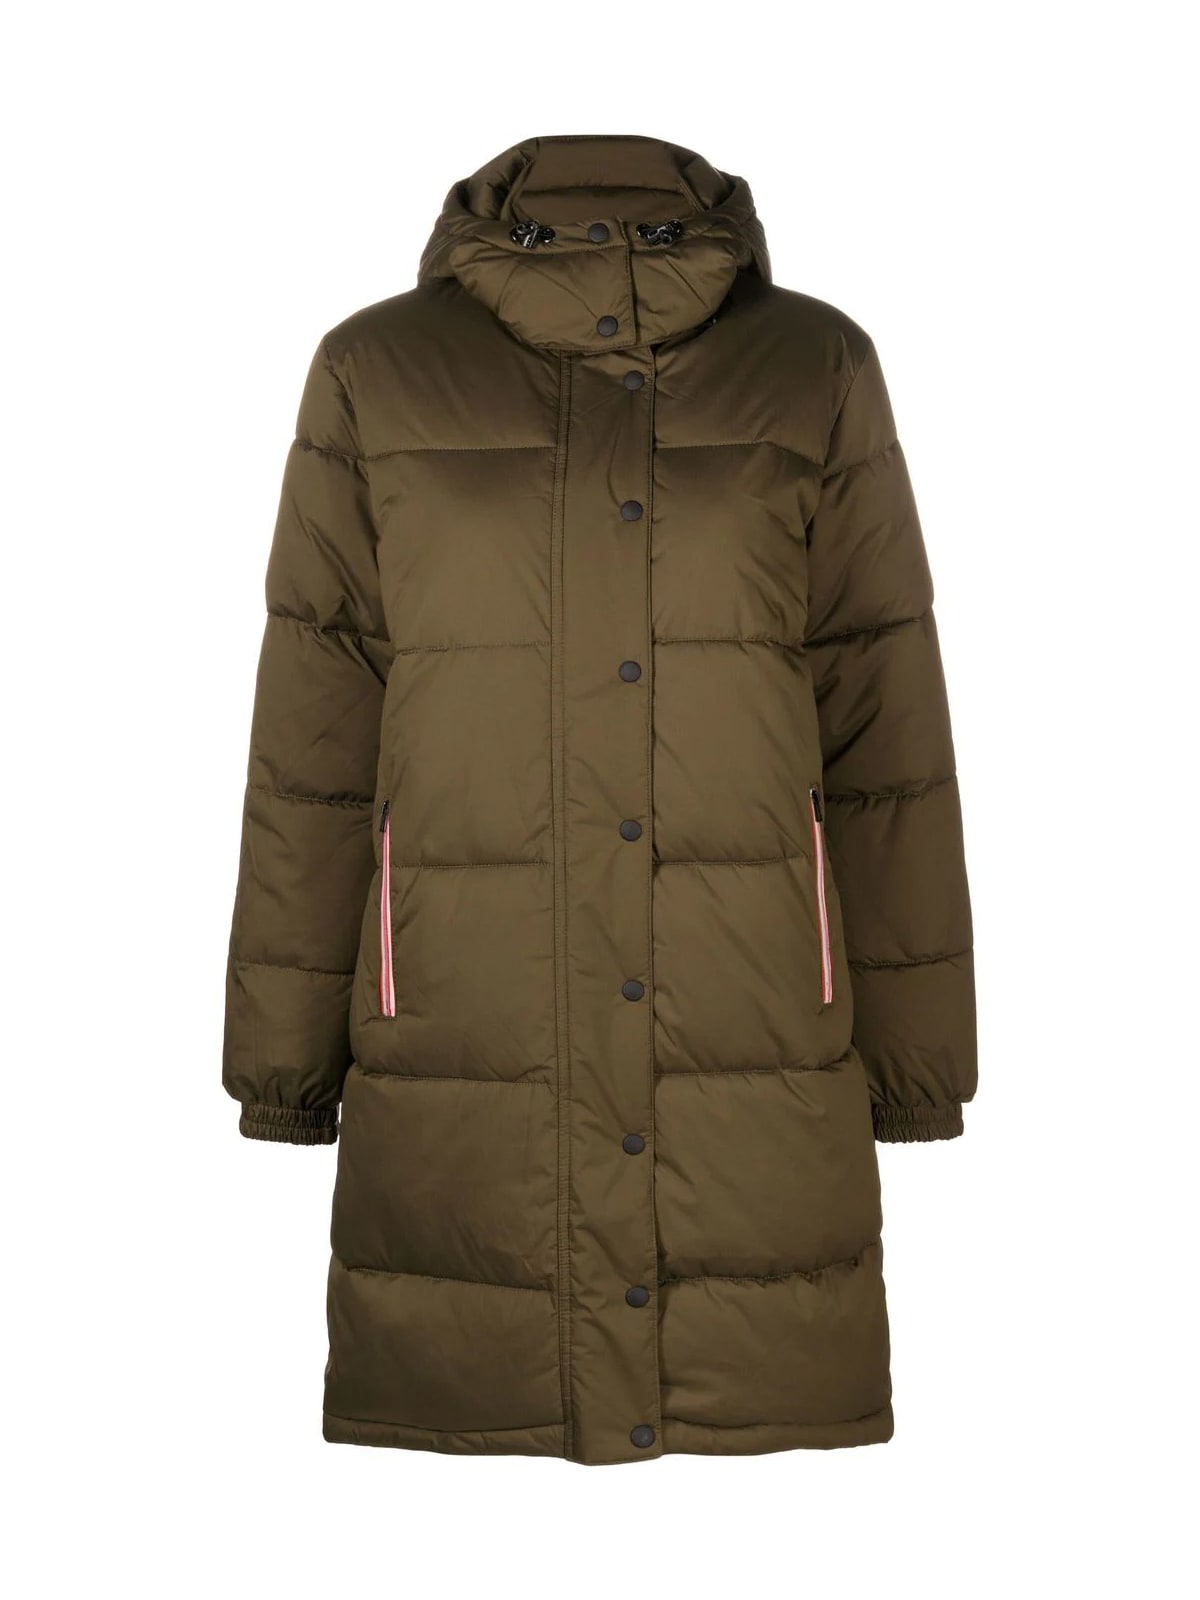 PS by Paul Smith Womens Long Fibre Down Jacket